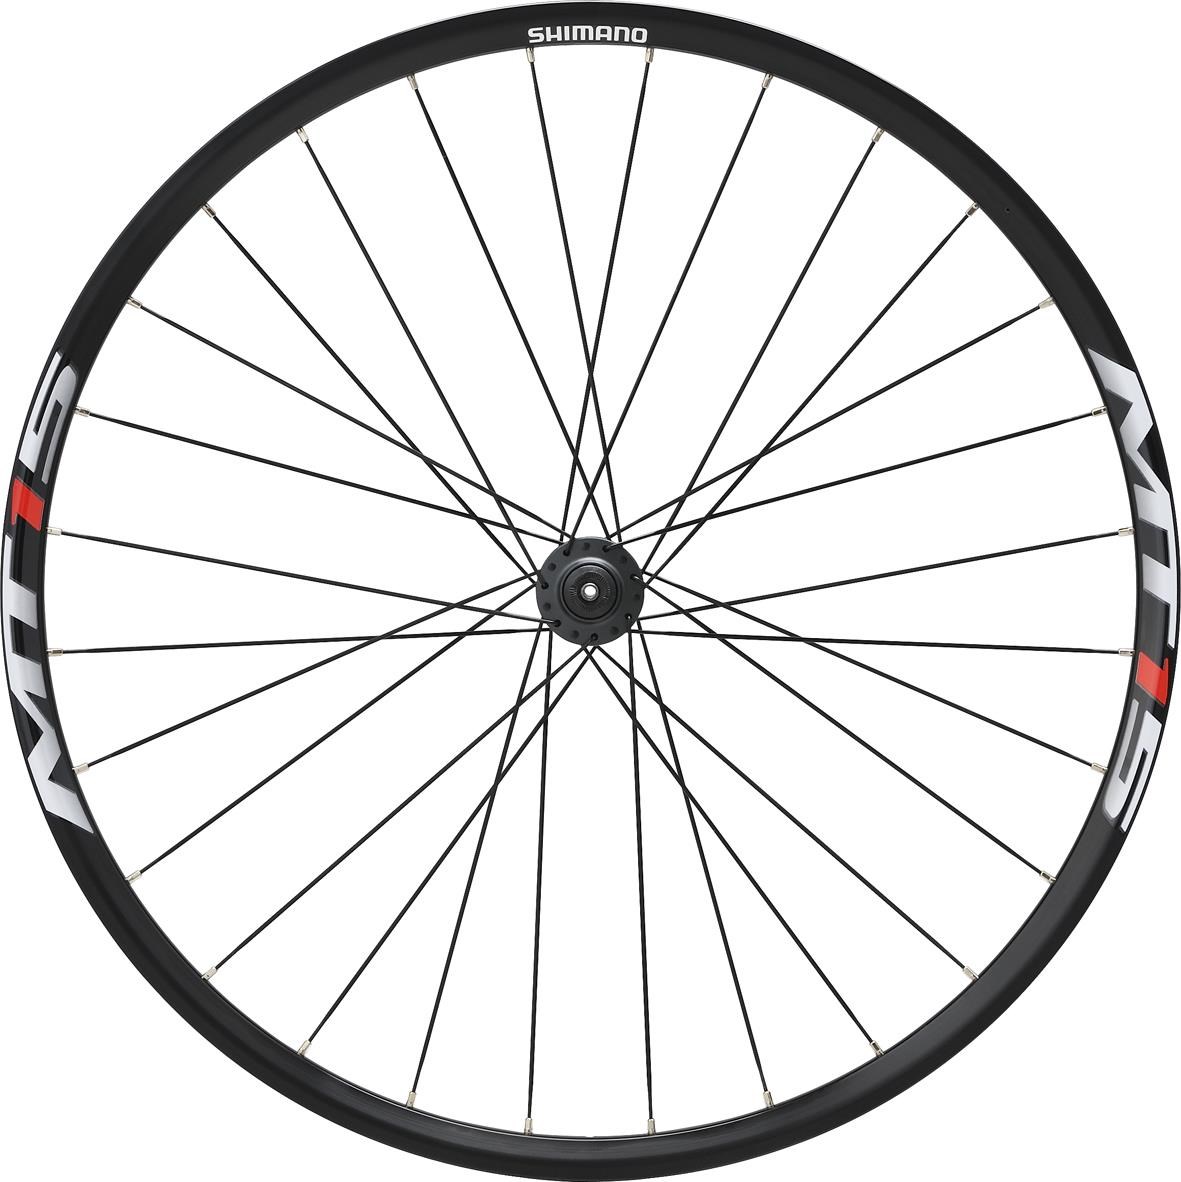 Shimano WH-MT15 XC Wheel - Q / R 100 mm Axle - 27.5in (650B) Clincher - Black - Front product image